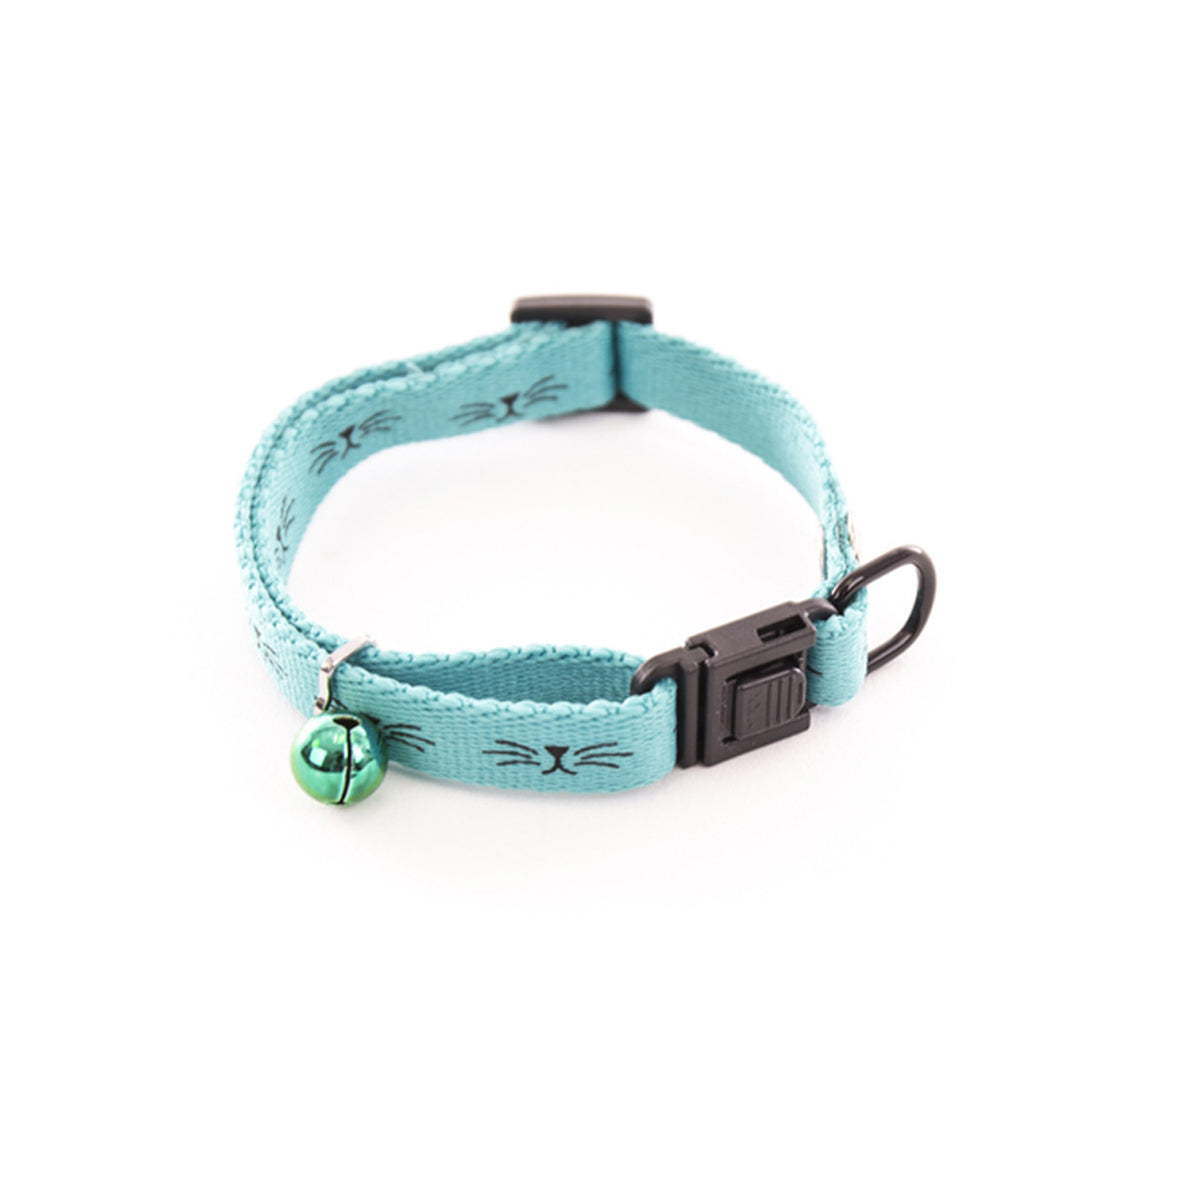 COLLIER CHAT FRIMOUSSE TURQUOISE